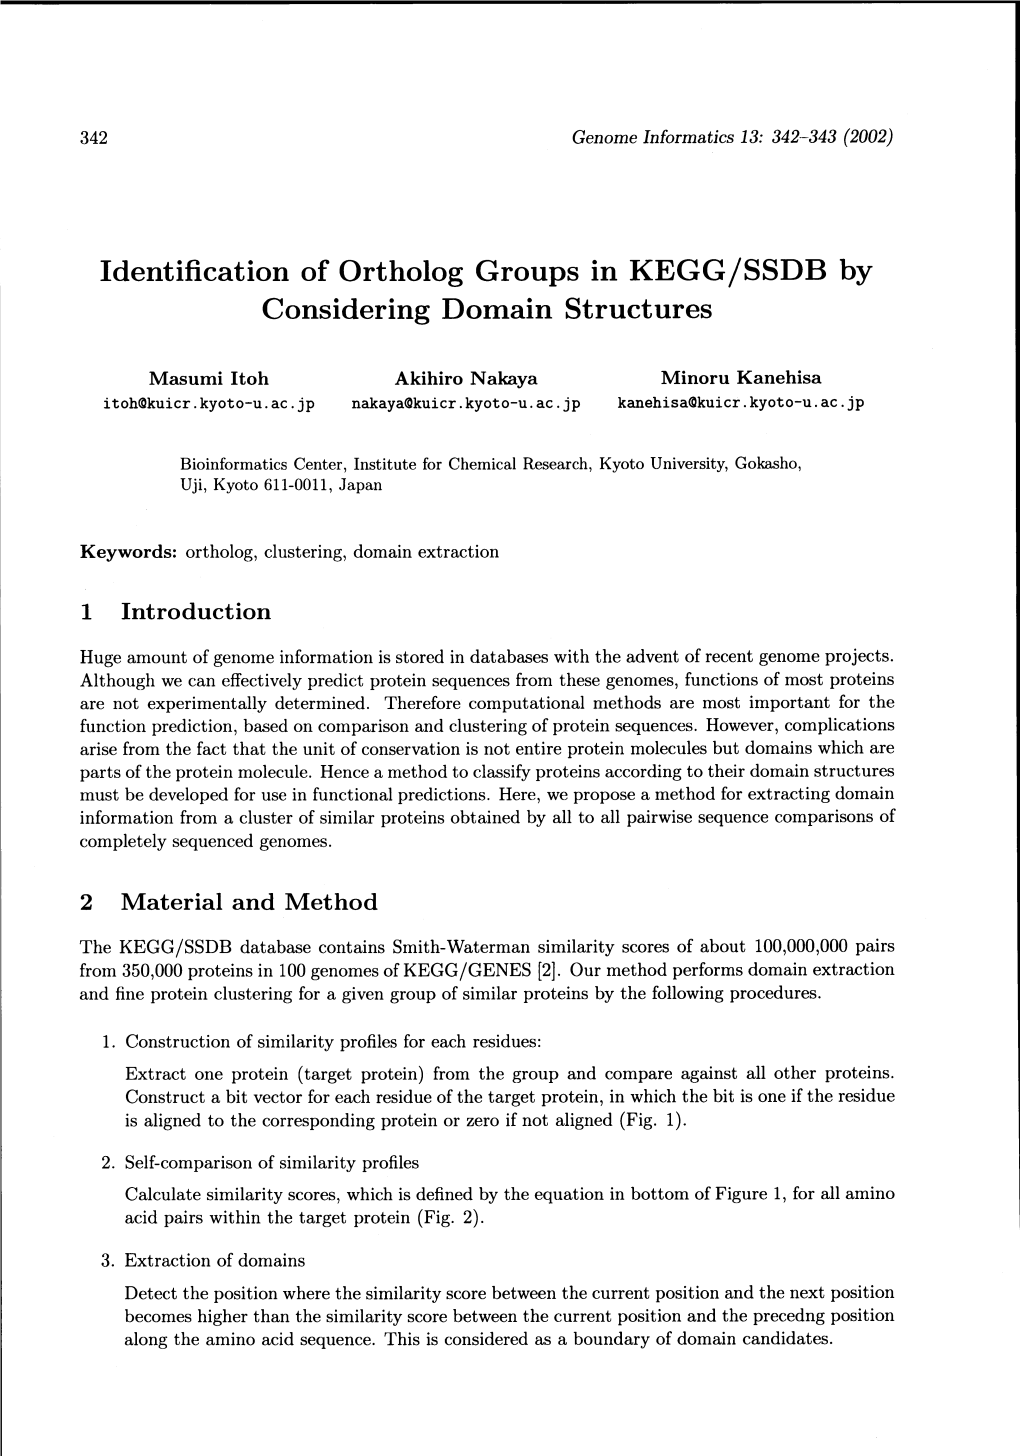 Identification of Ortholog Groups in KEGG/SSDB by Considering Domain Structures